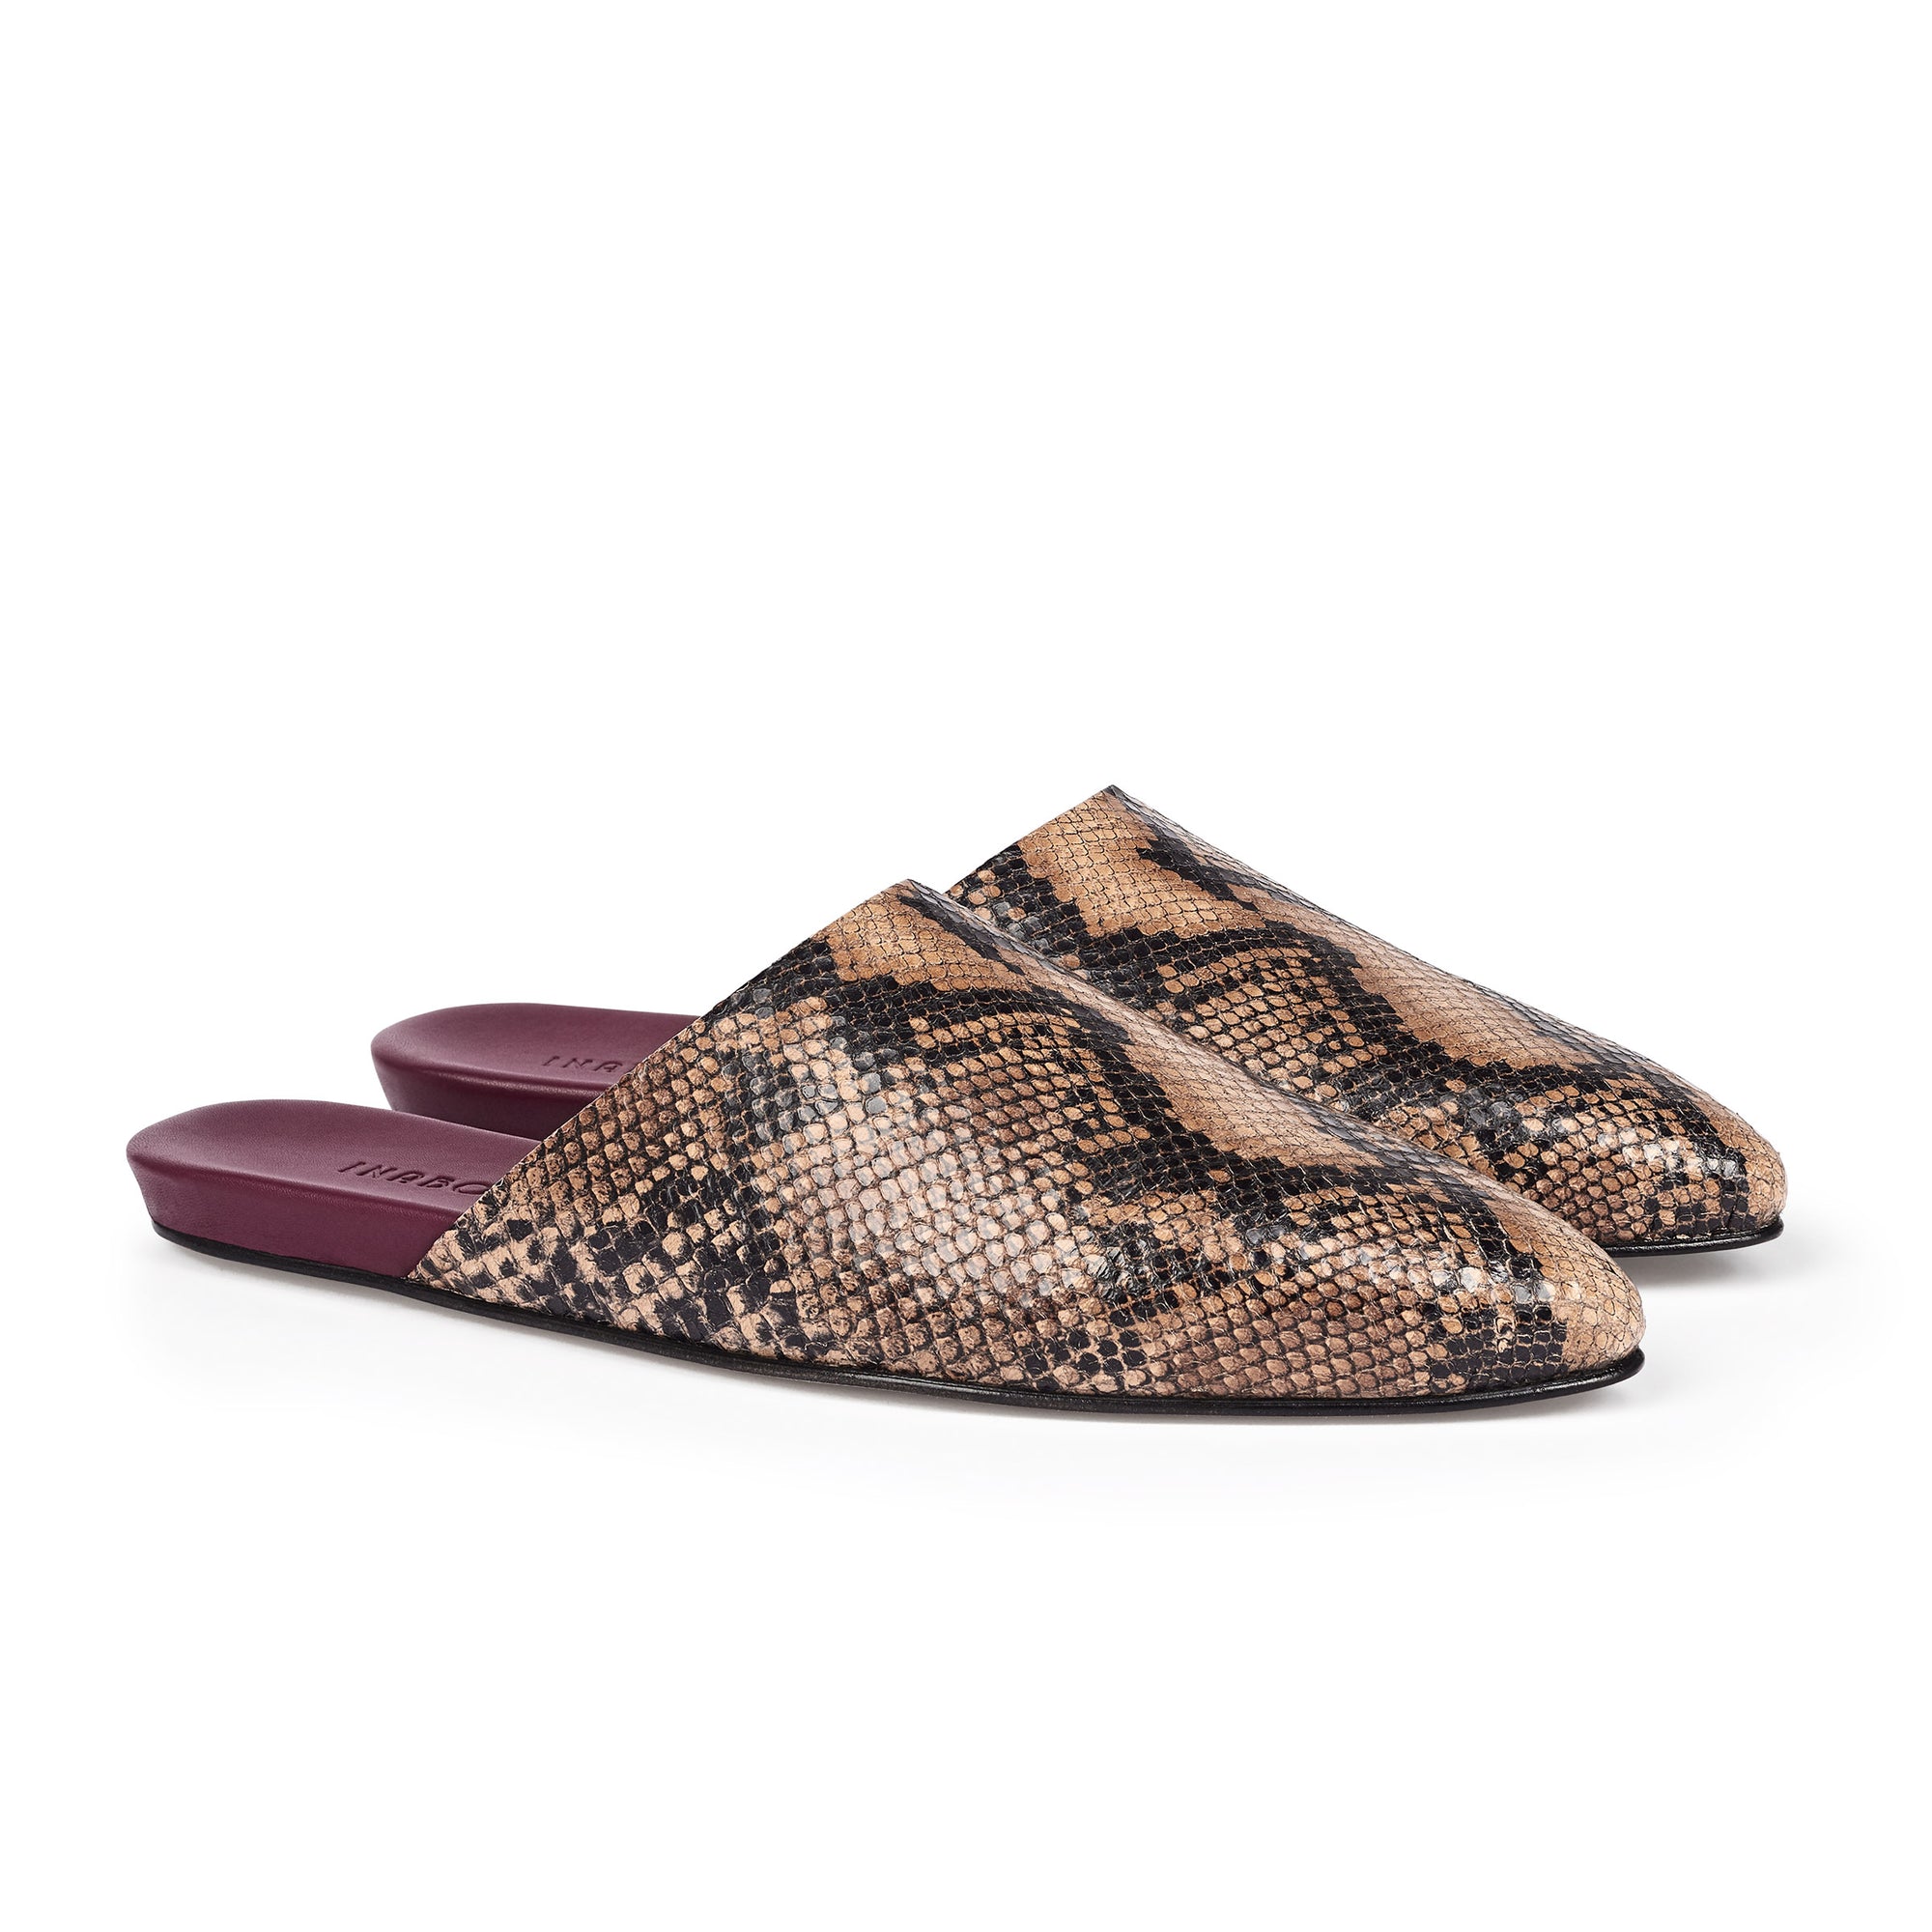 Inabo Women's Slider Slipper in Nougat Snake leather and burgundy leather insole